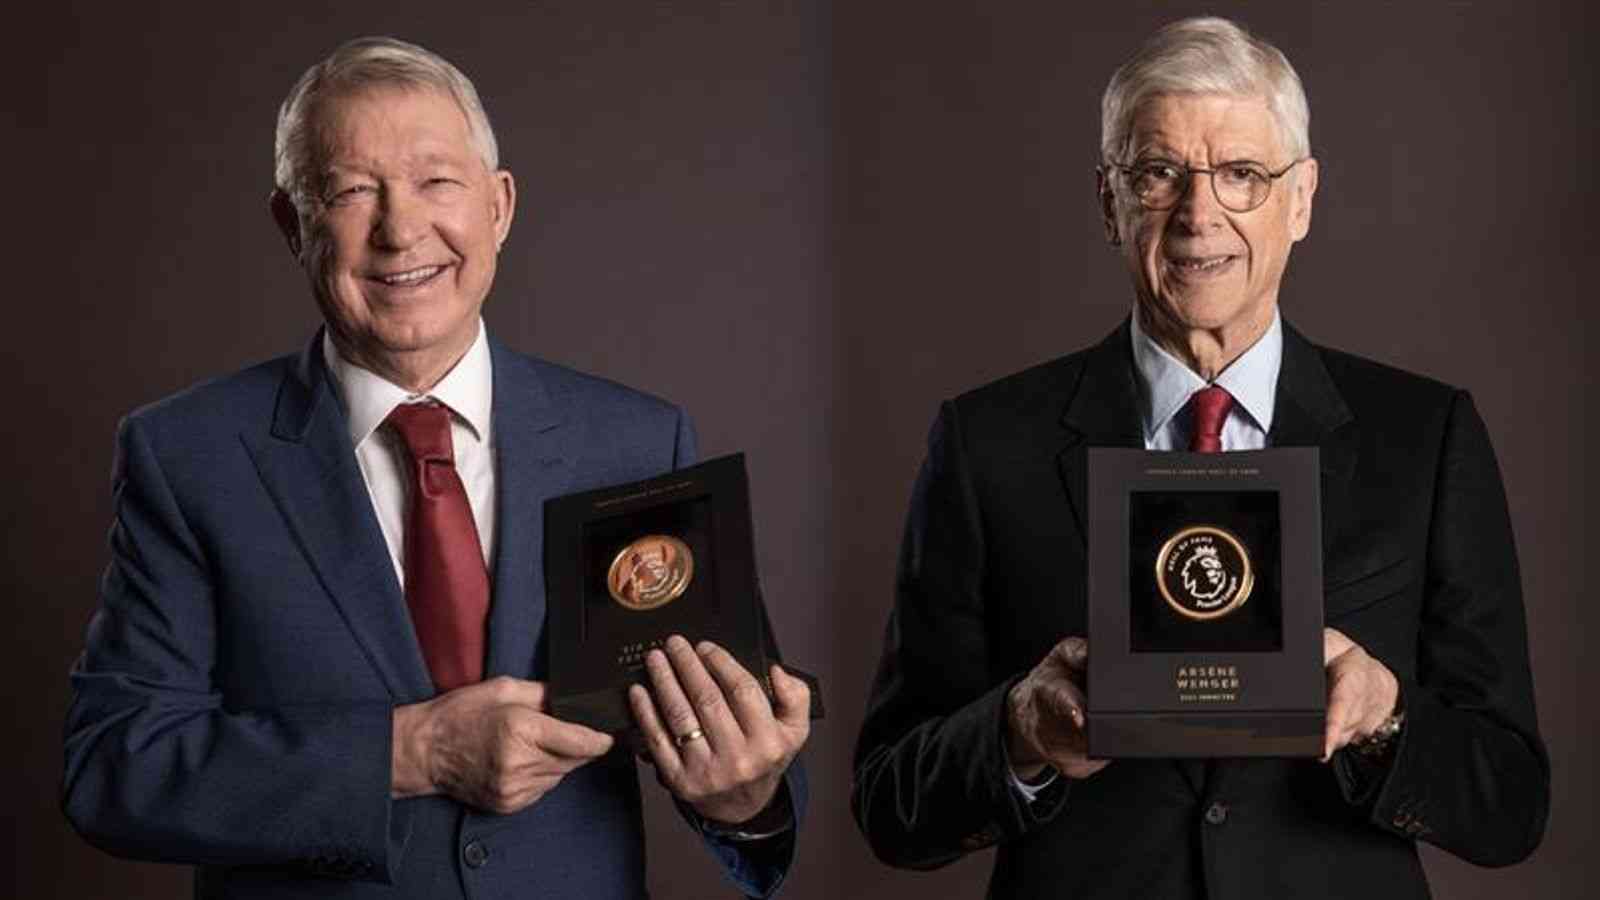 Premier League Hall of Fame: Arsene Wenger and Sir Alex Ferguson become first managers to be inducted